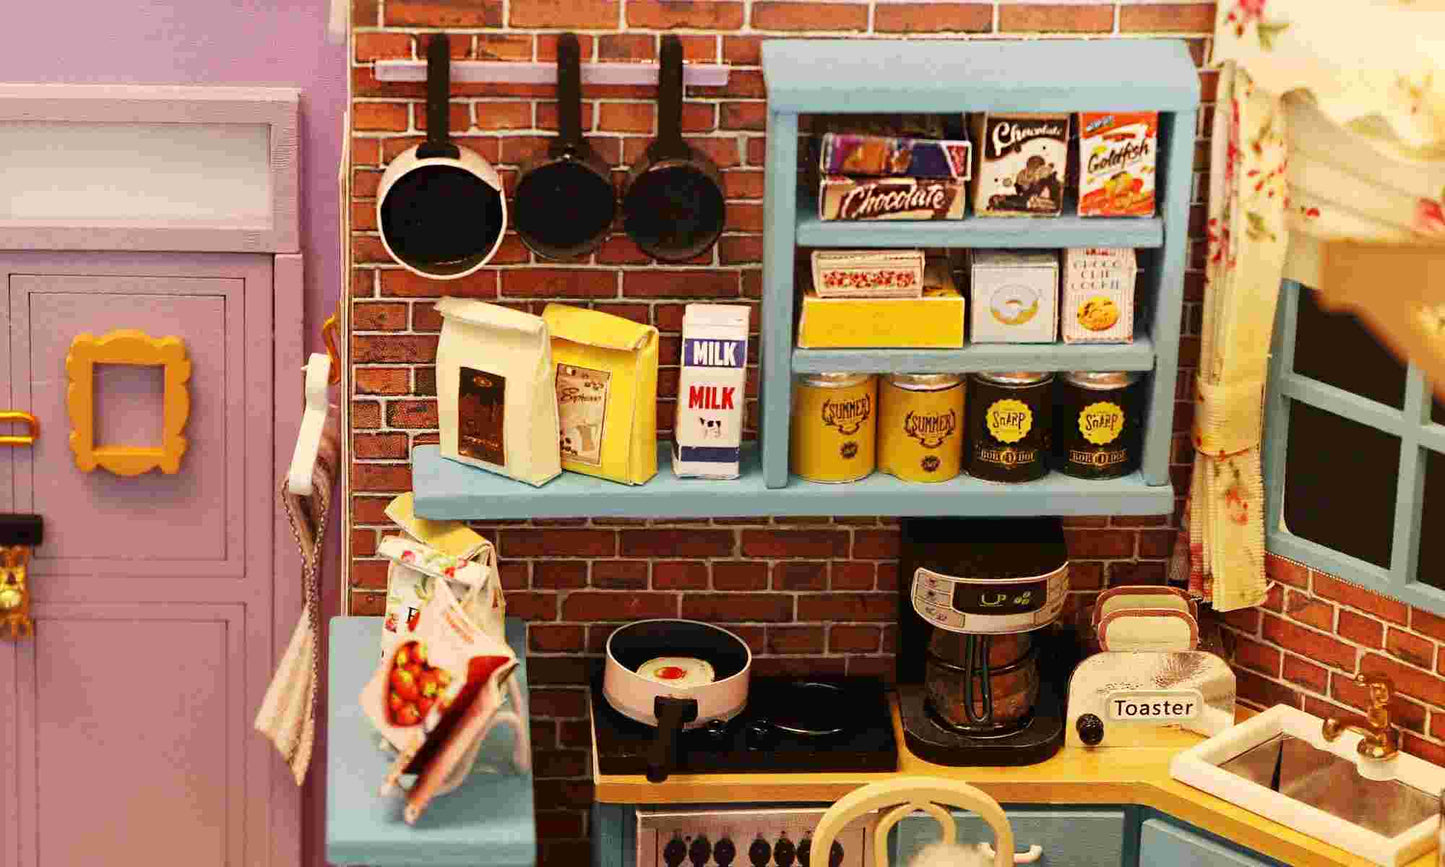 Monica's Apartment DIY Dollhouse kit, a miniature house crafts inspired by the TV show "Friends", perfect for model building lovers, dollhouse collectors, home decor, A great DIY project for "Friends" fans.